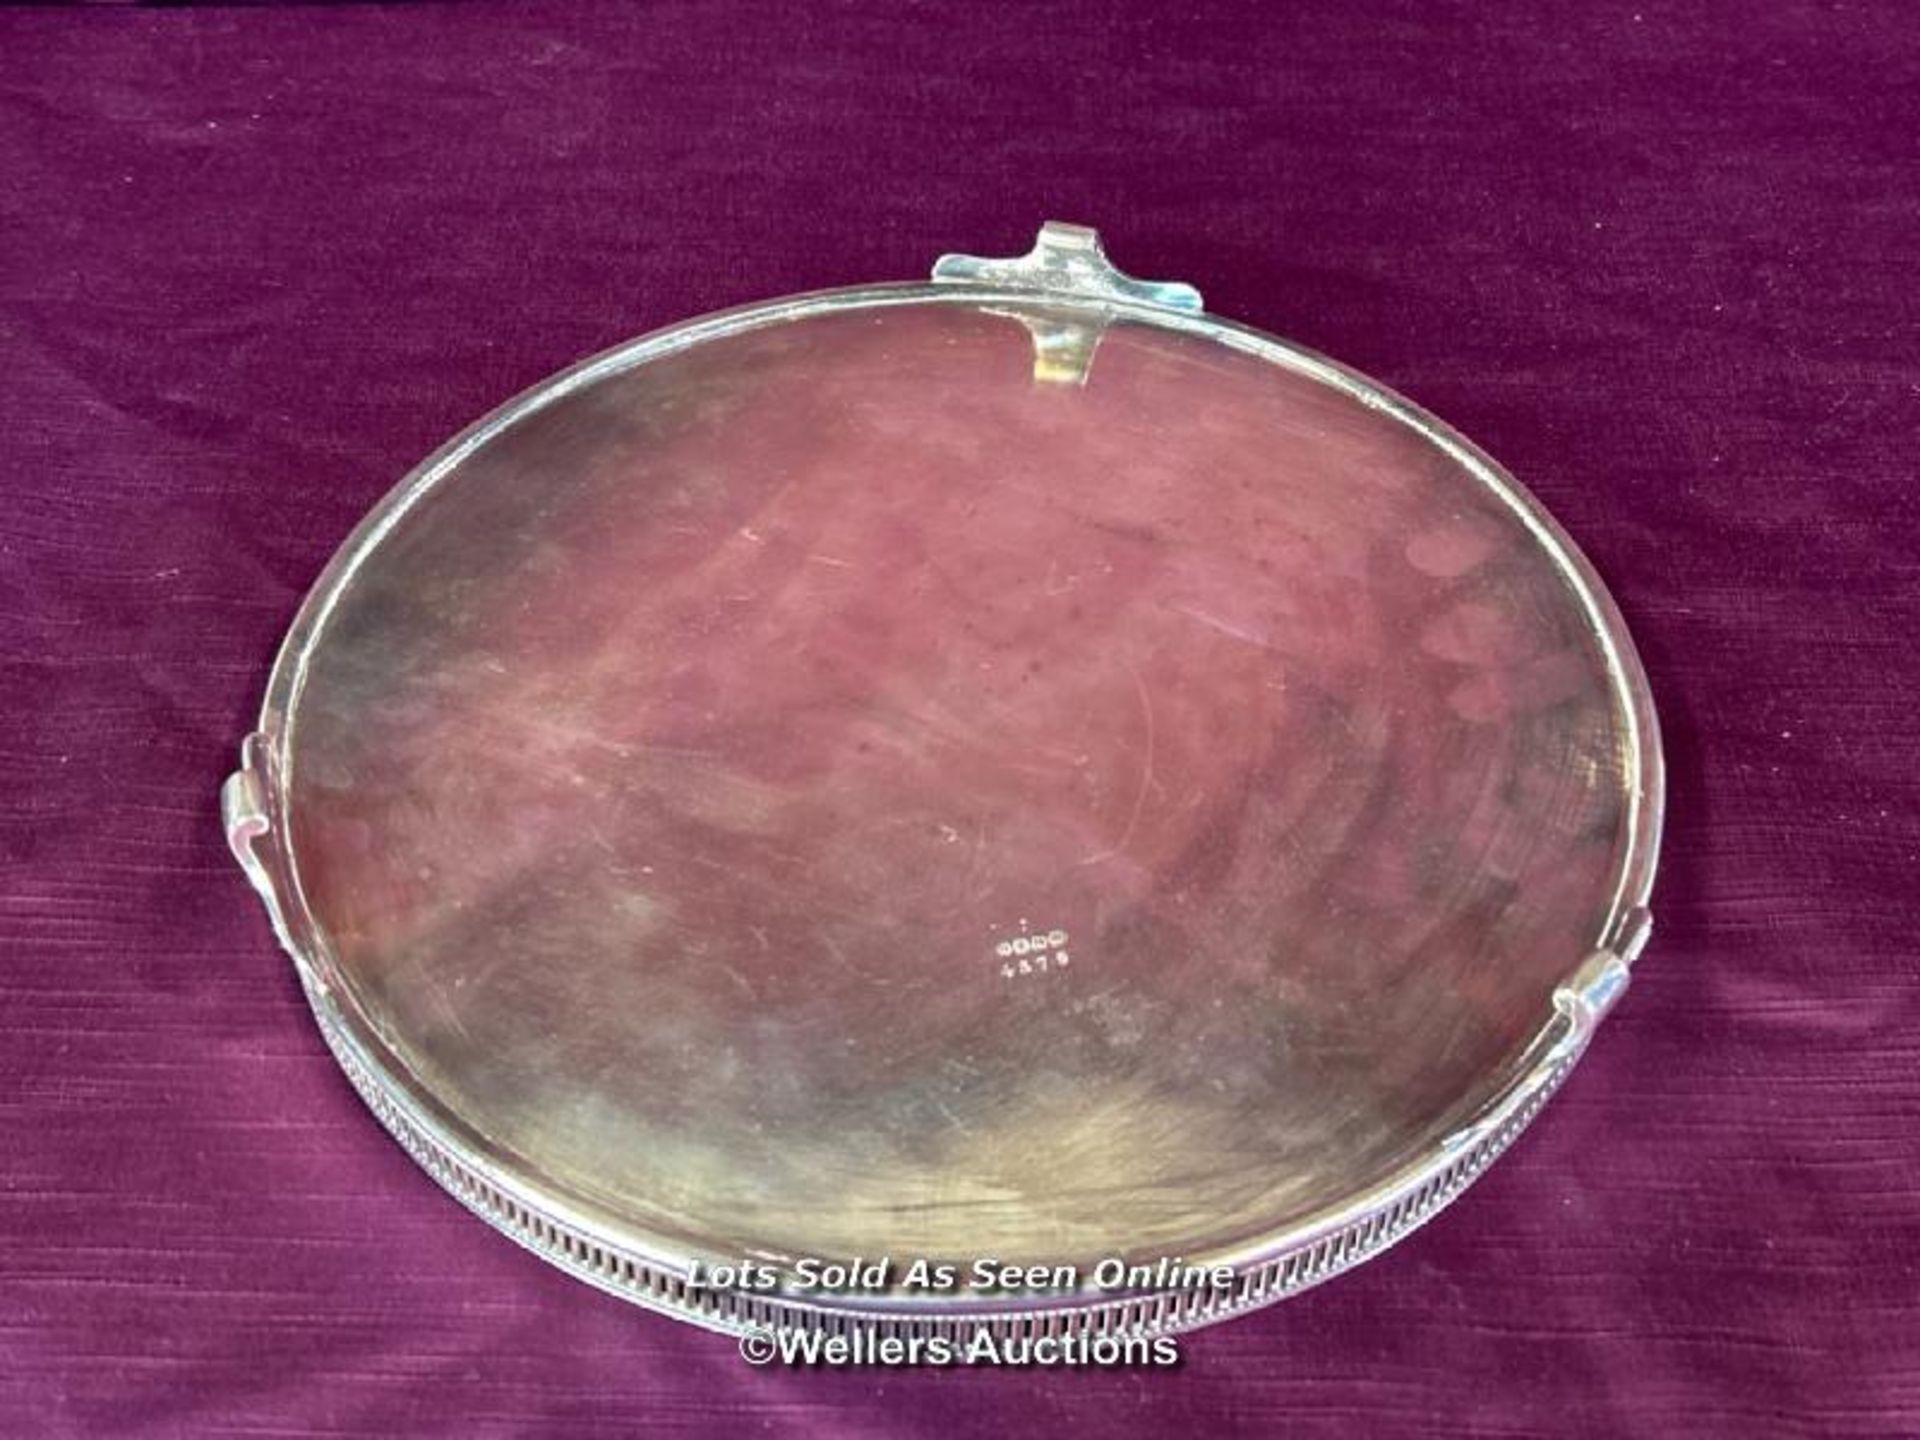 WHITE METAL GALLERY TRAY BY H & H, DIAMETER 25.5CM, WEIGHT 711GMS - Image 2 of 3